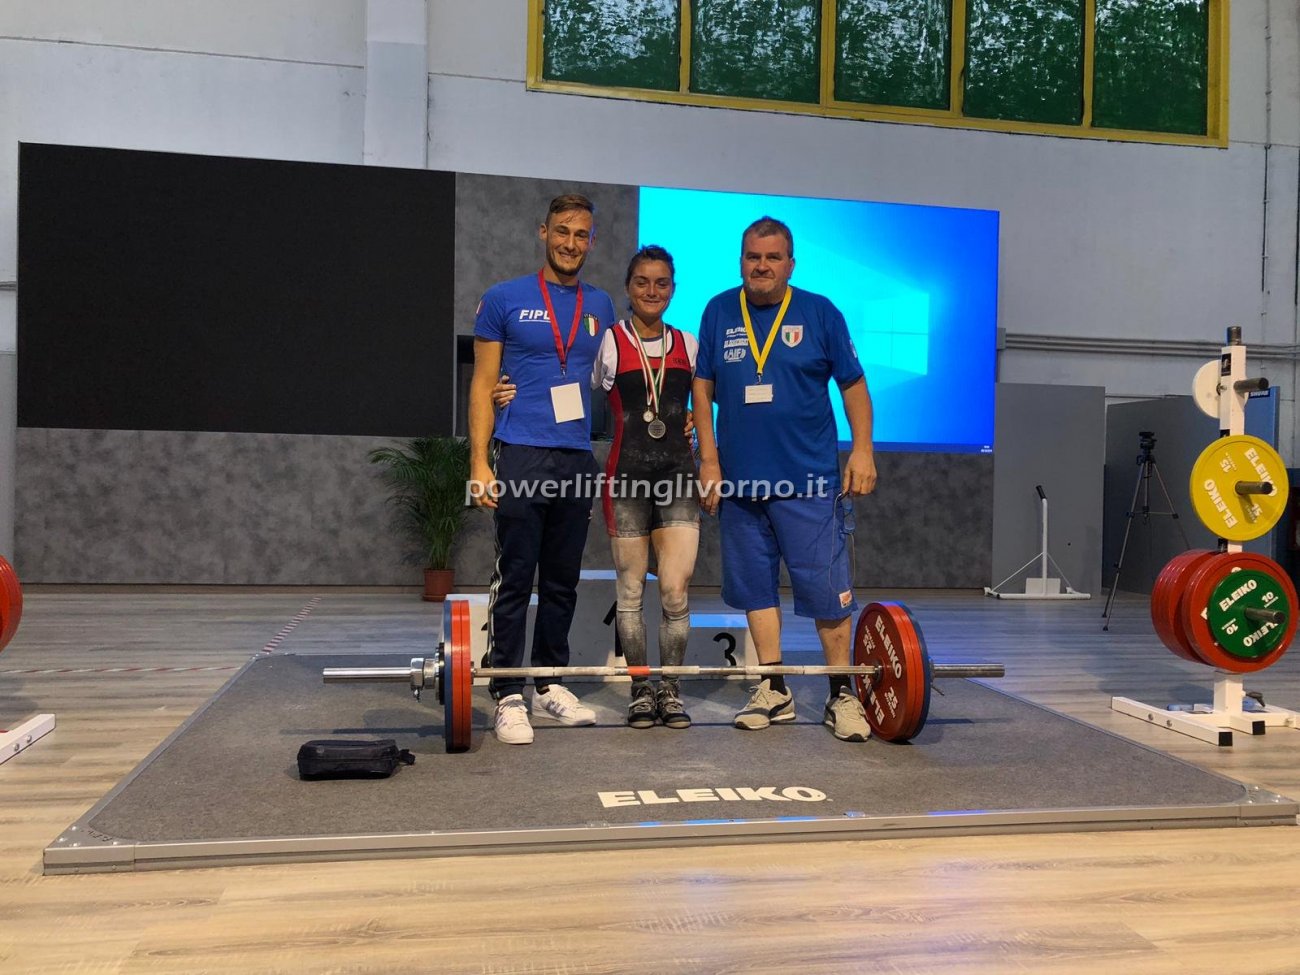 Lions Powerlifting Livorno - Beauty and the beasts ...